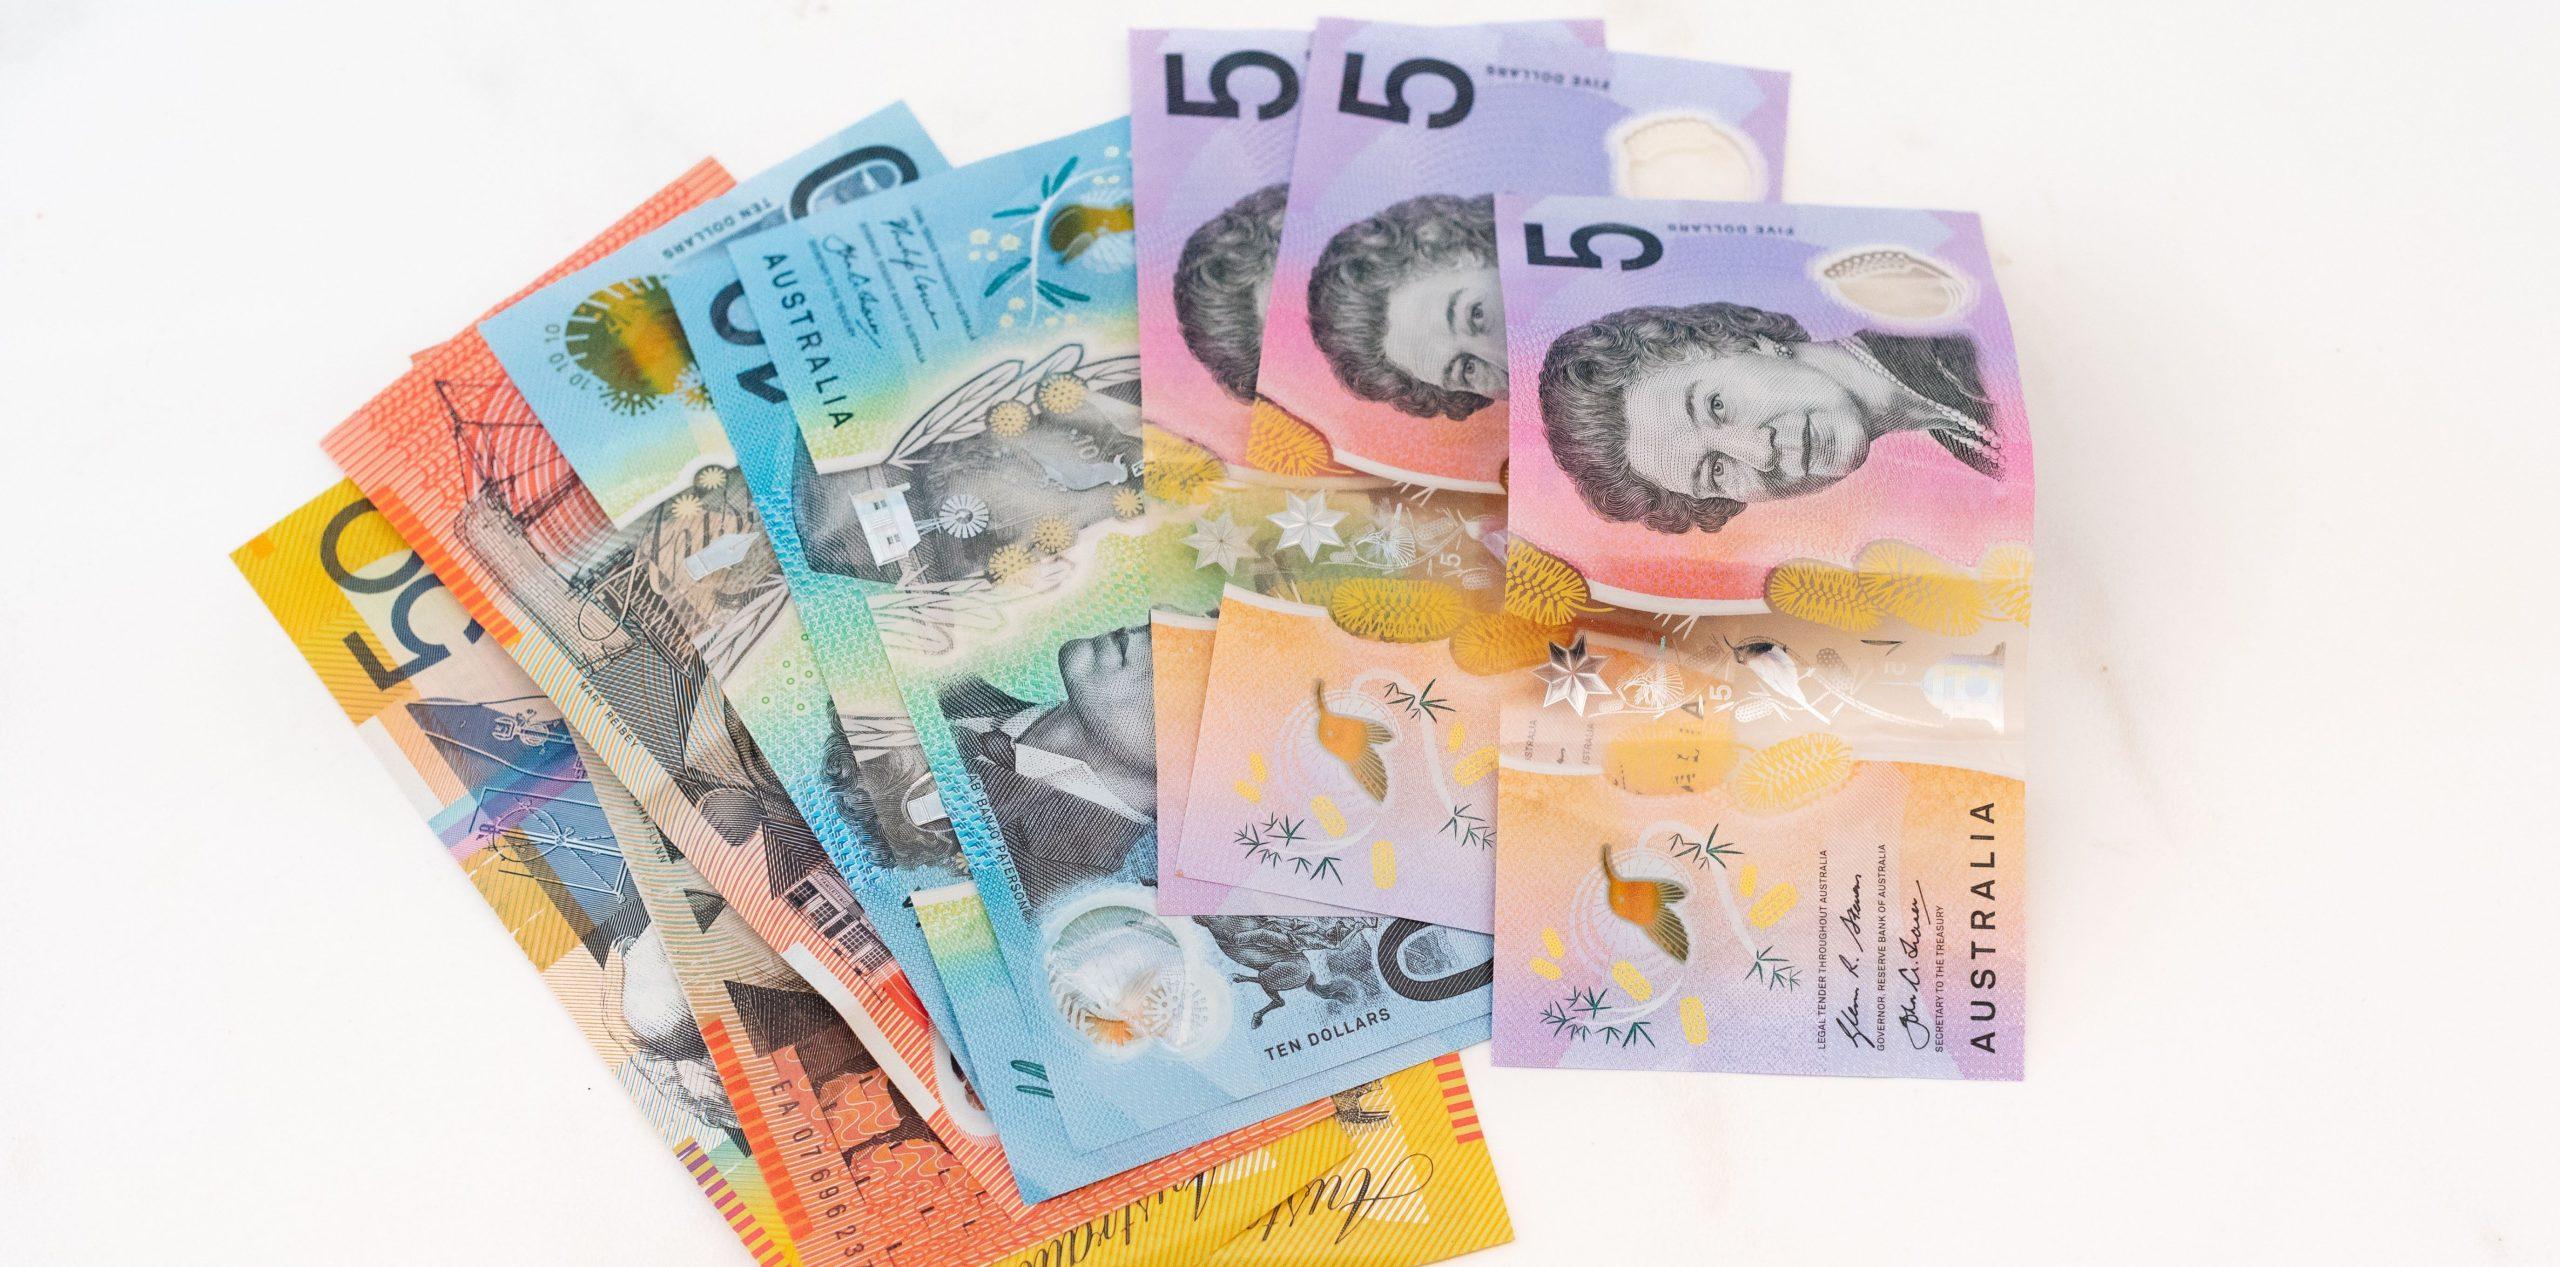 Australian banknotes laid out on a white background.